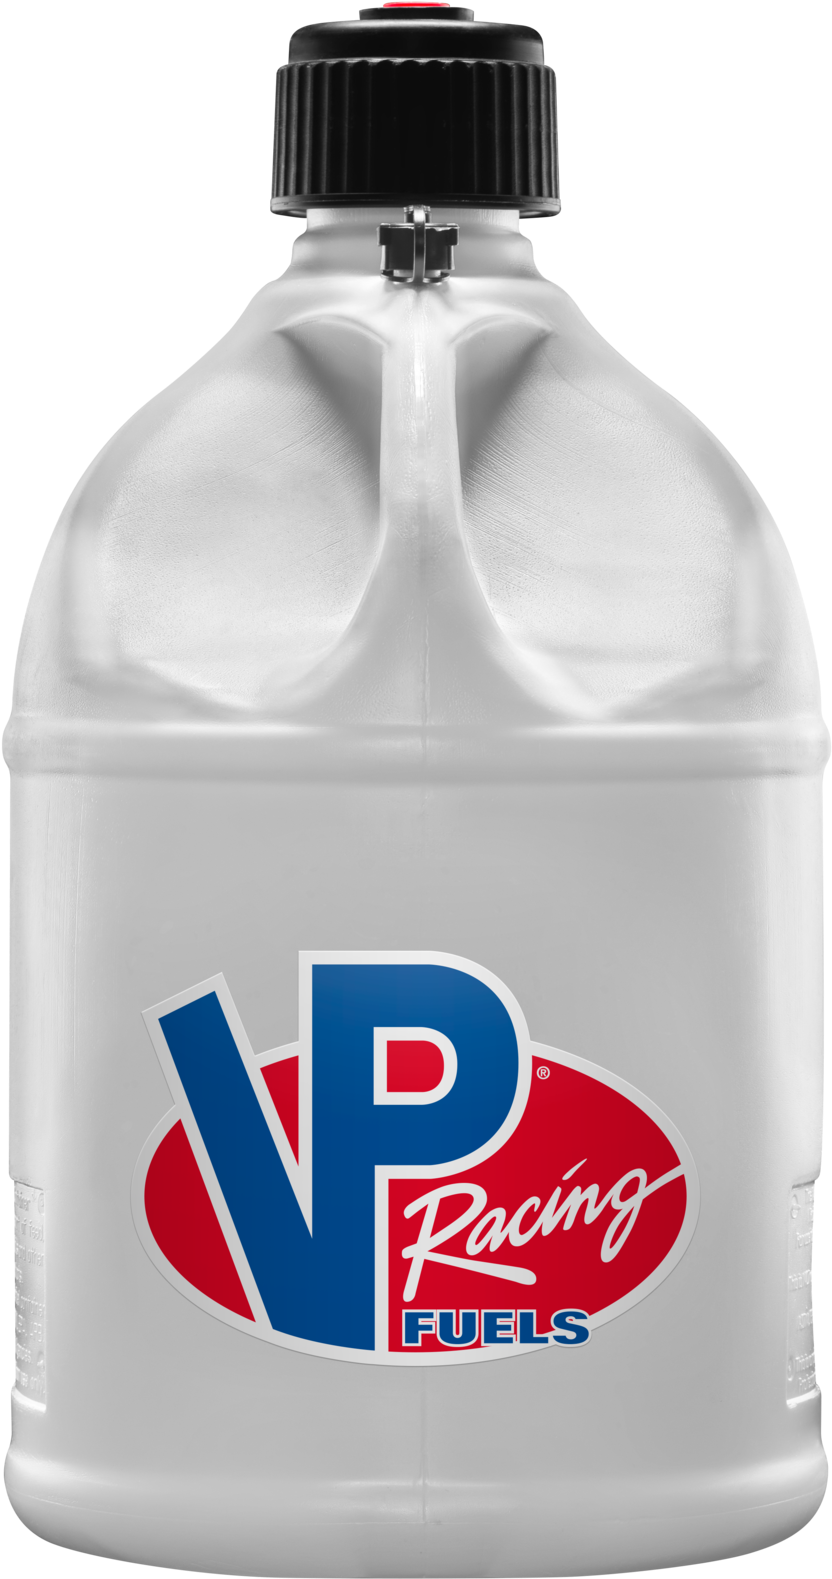 Round Motorsport Container 20 Litre - Vp Racing Fuel Clipart - Large ...